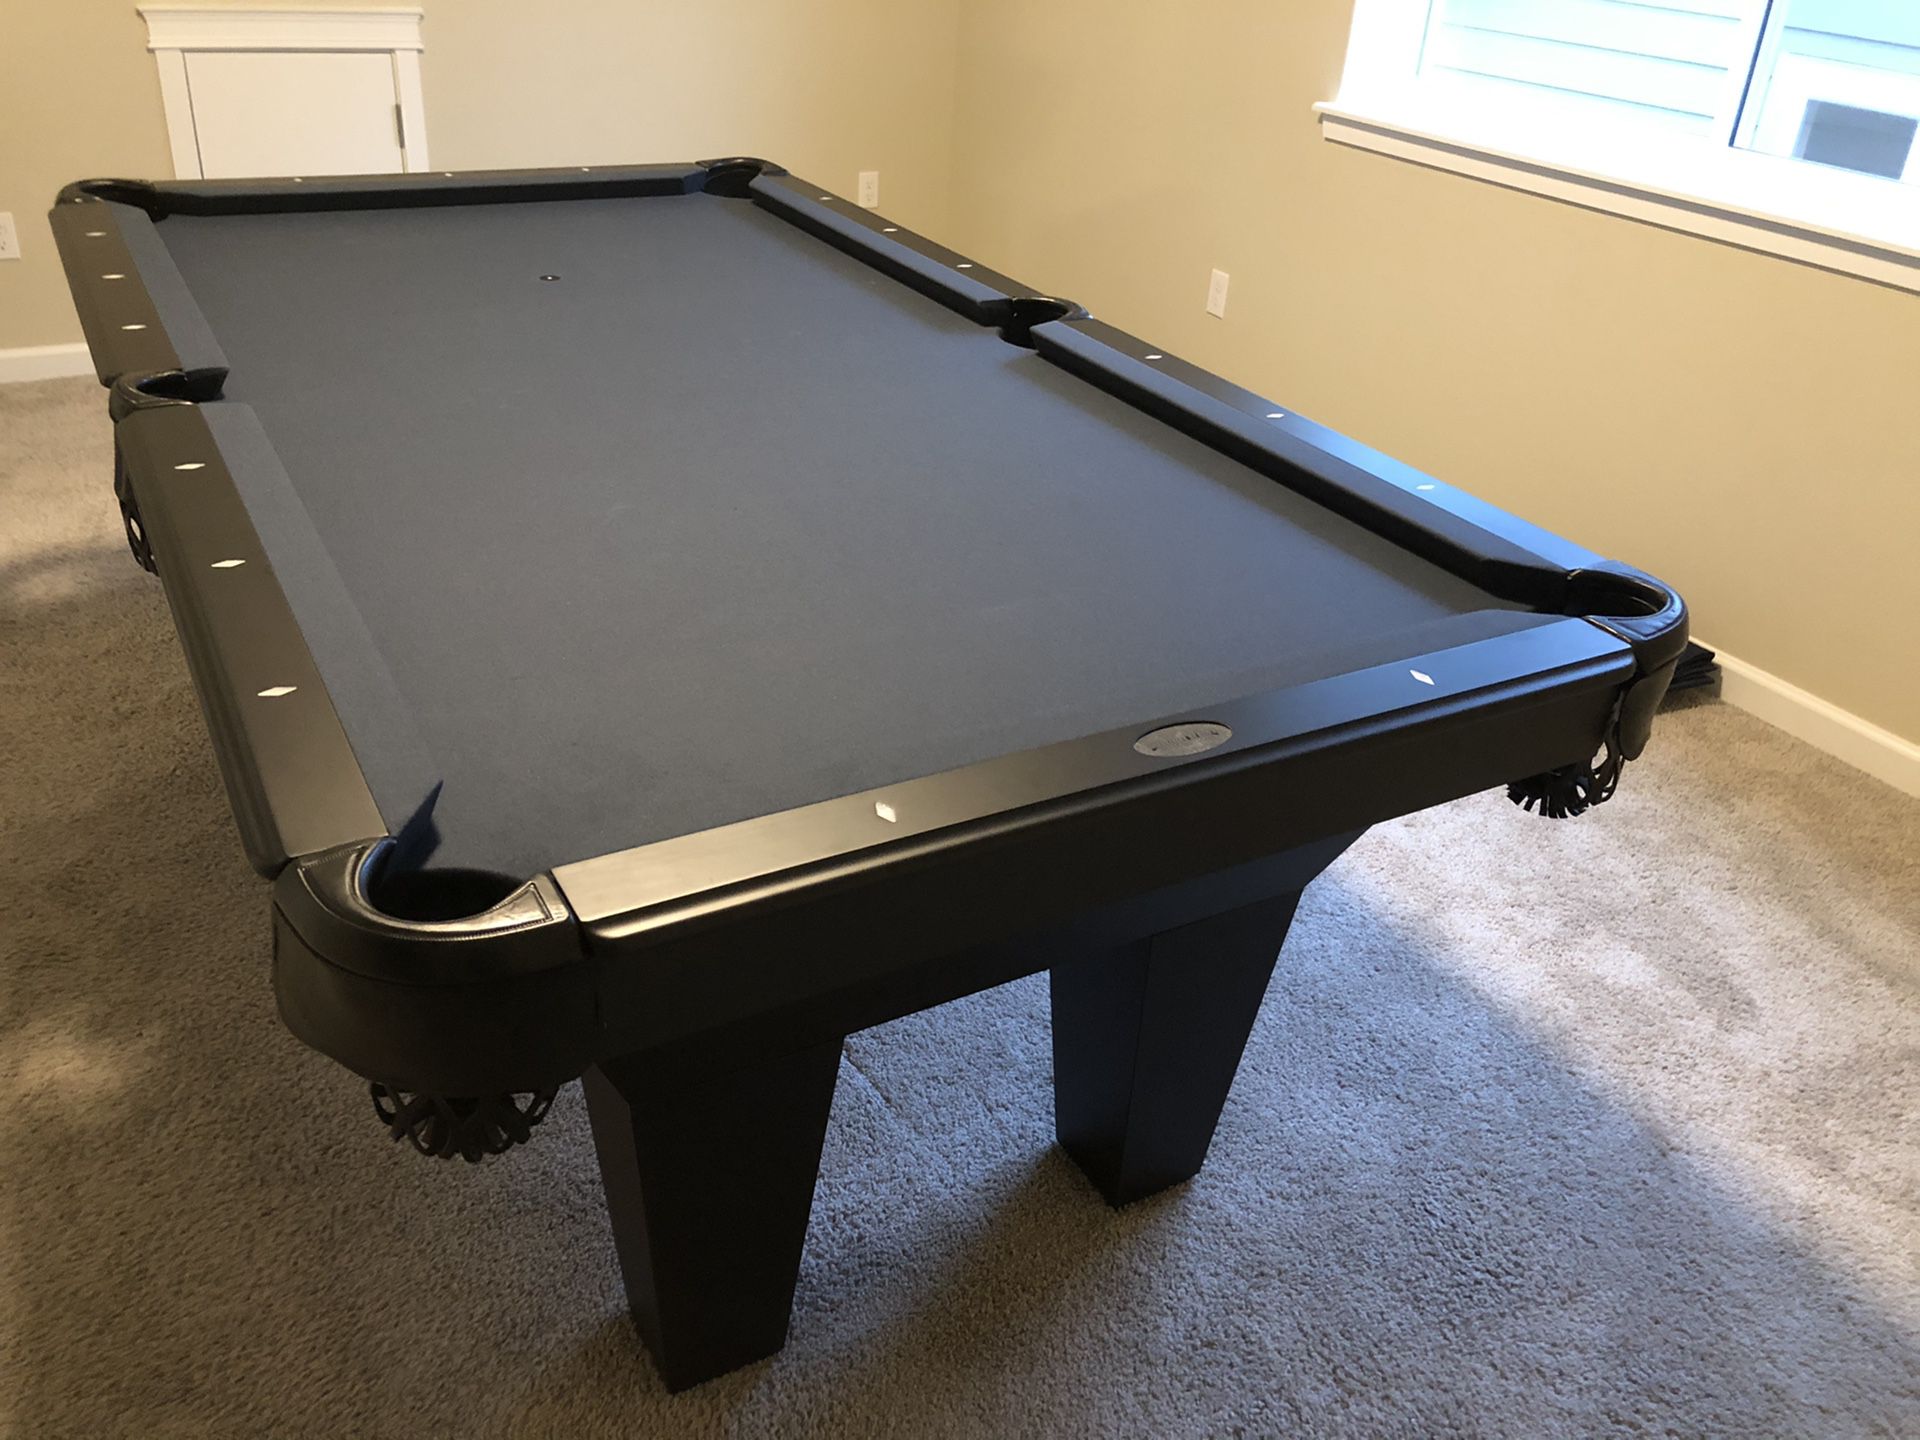 New Kamon Pool Table, Built in USA! Black or Dark Cherry finishes available.